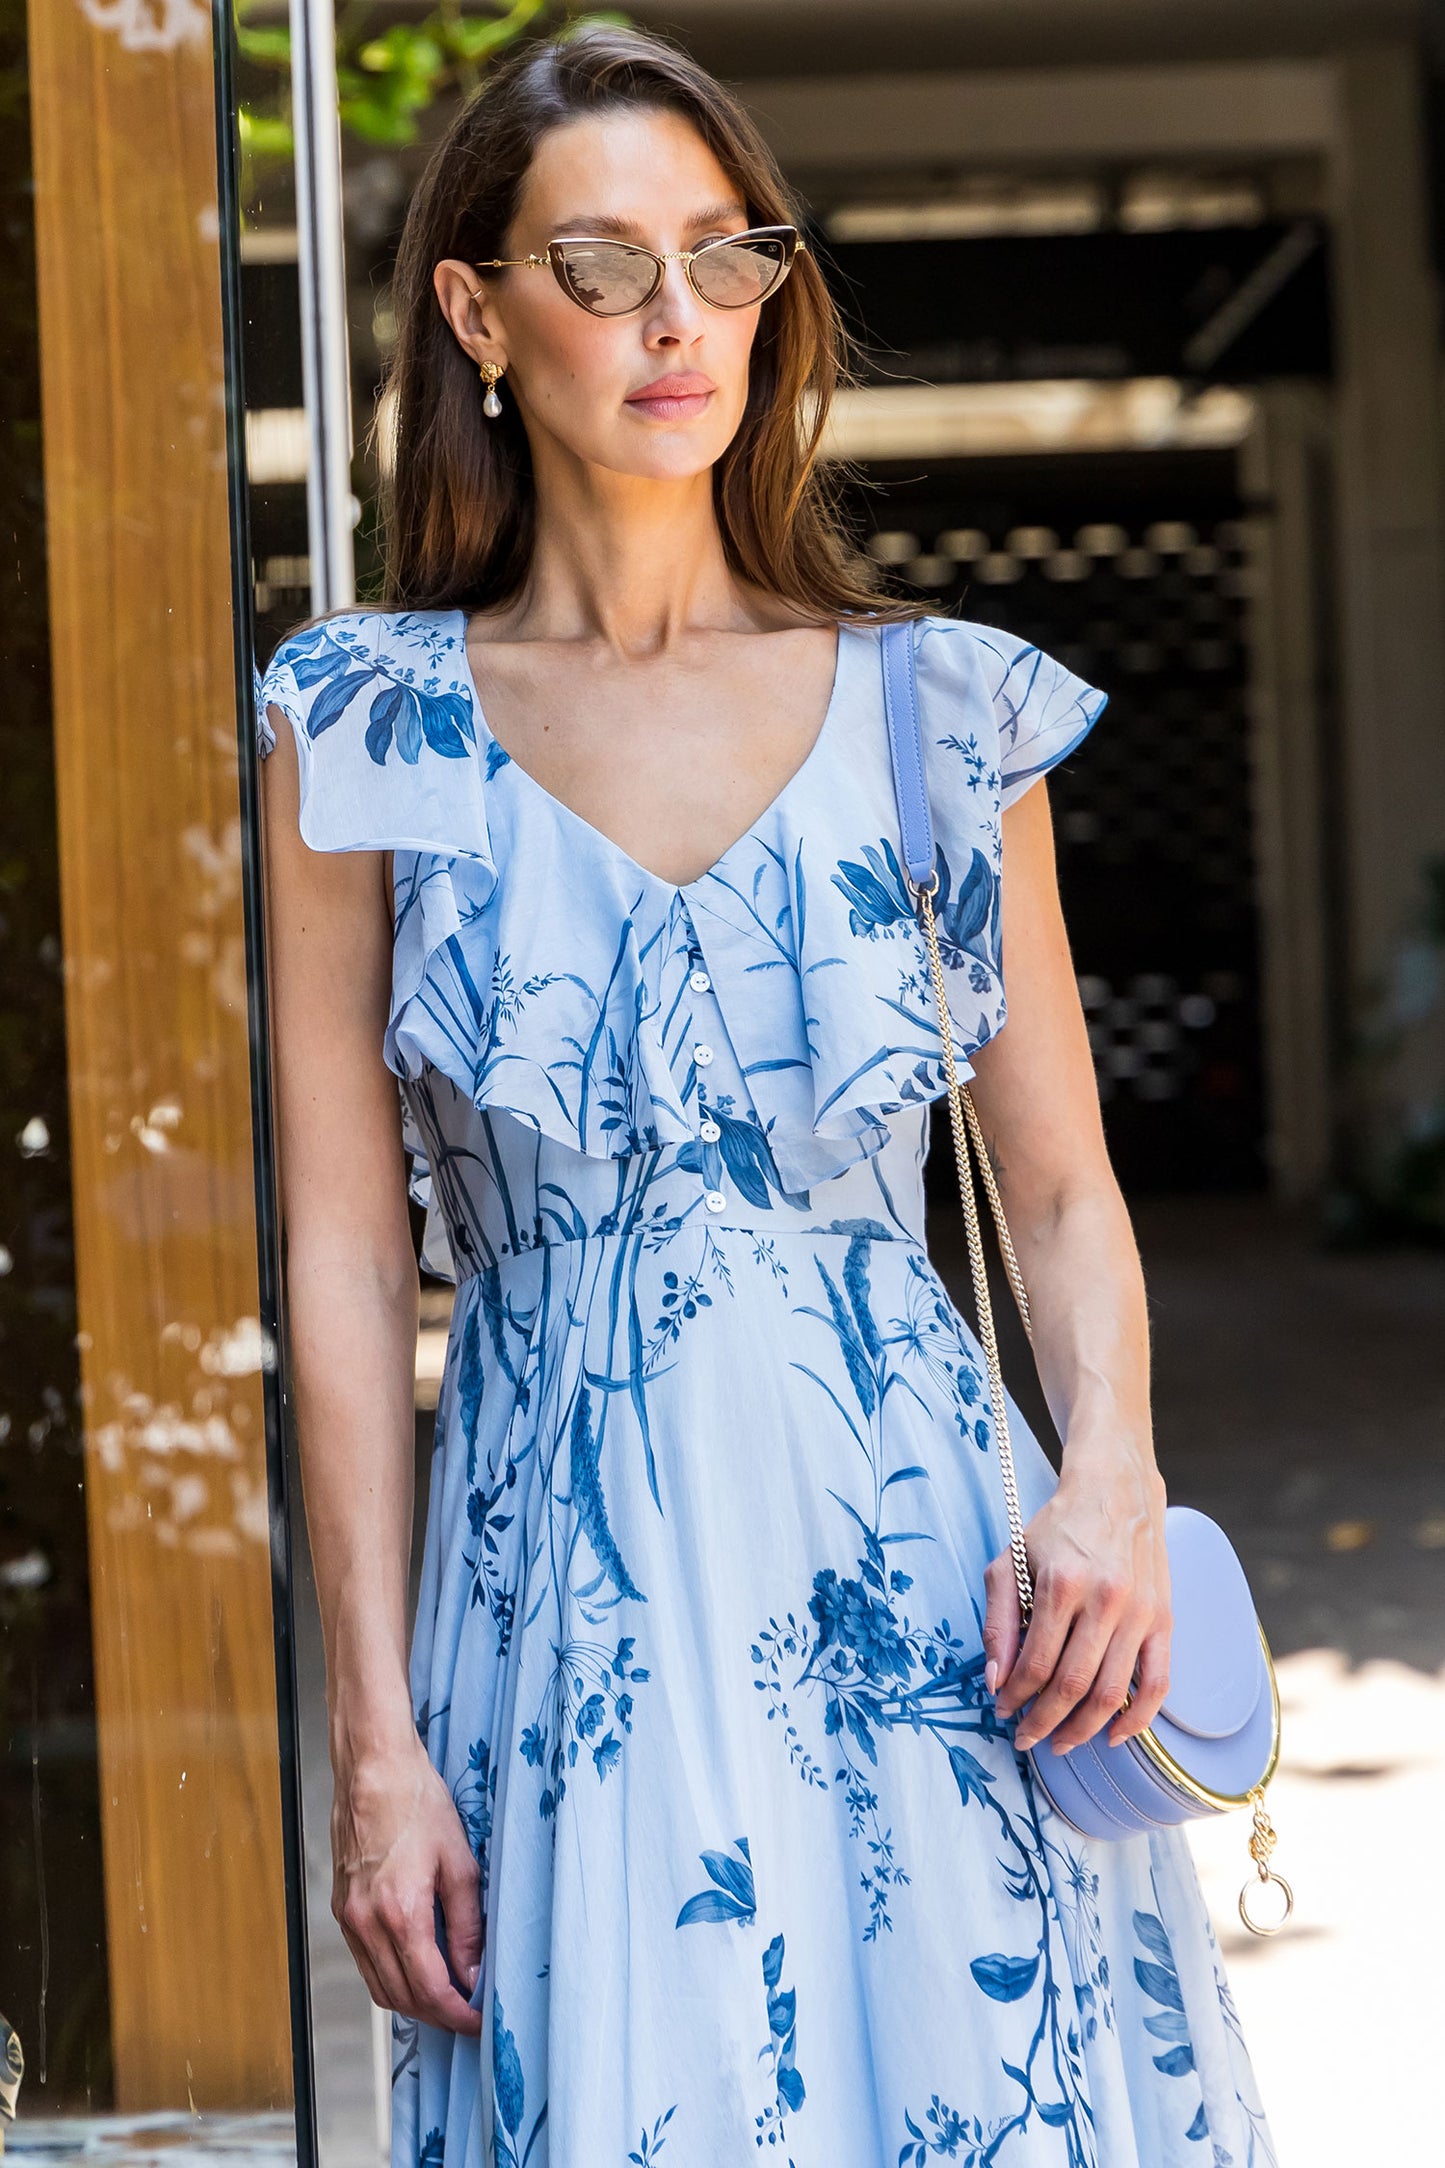 Fit and Flare Midi Dress